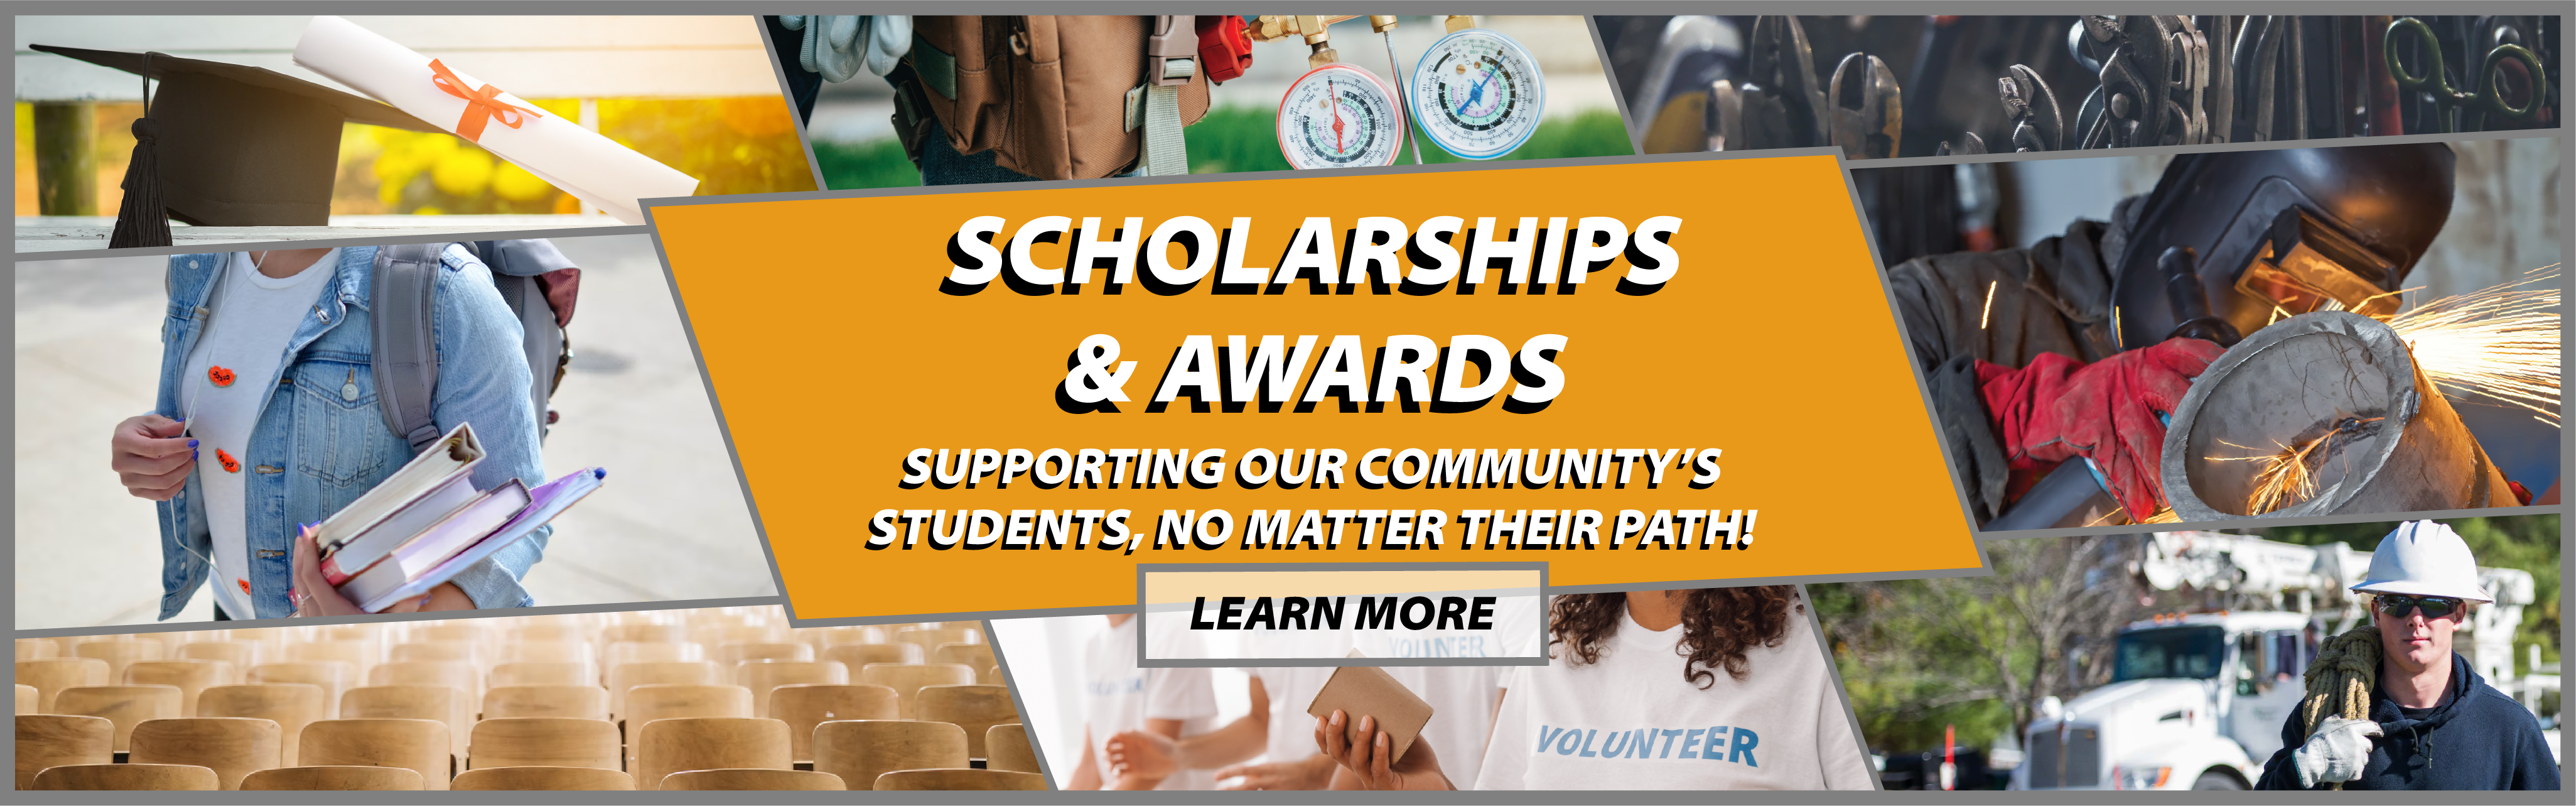 Scholarships & Awards - Supporting our community's students, no matter their path! LEARN MORE